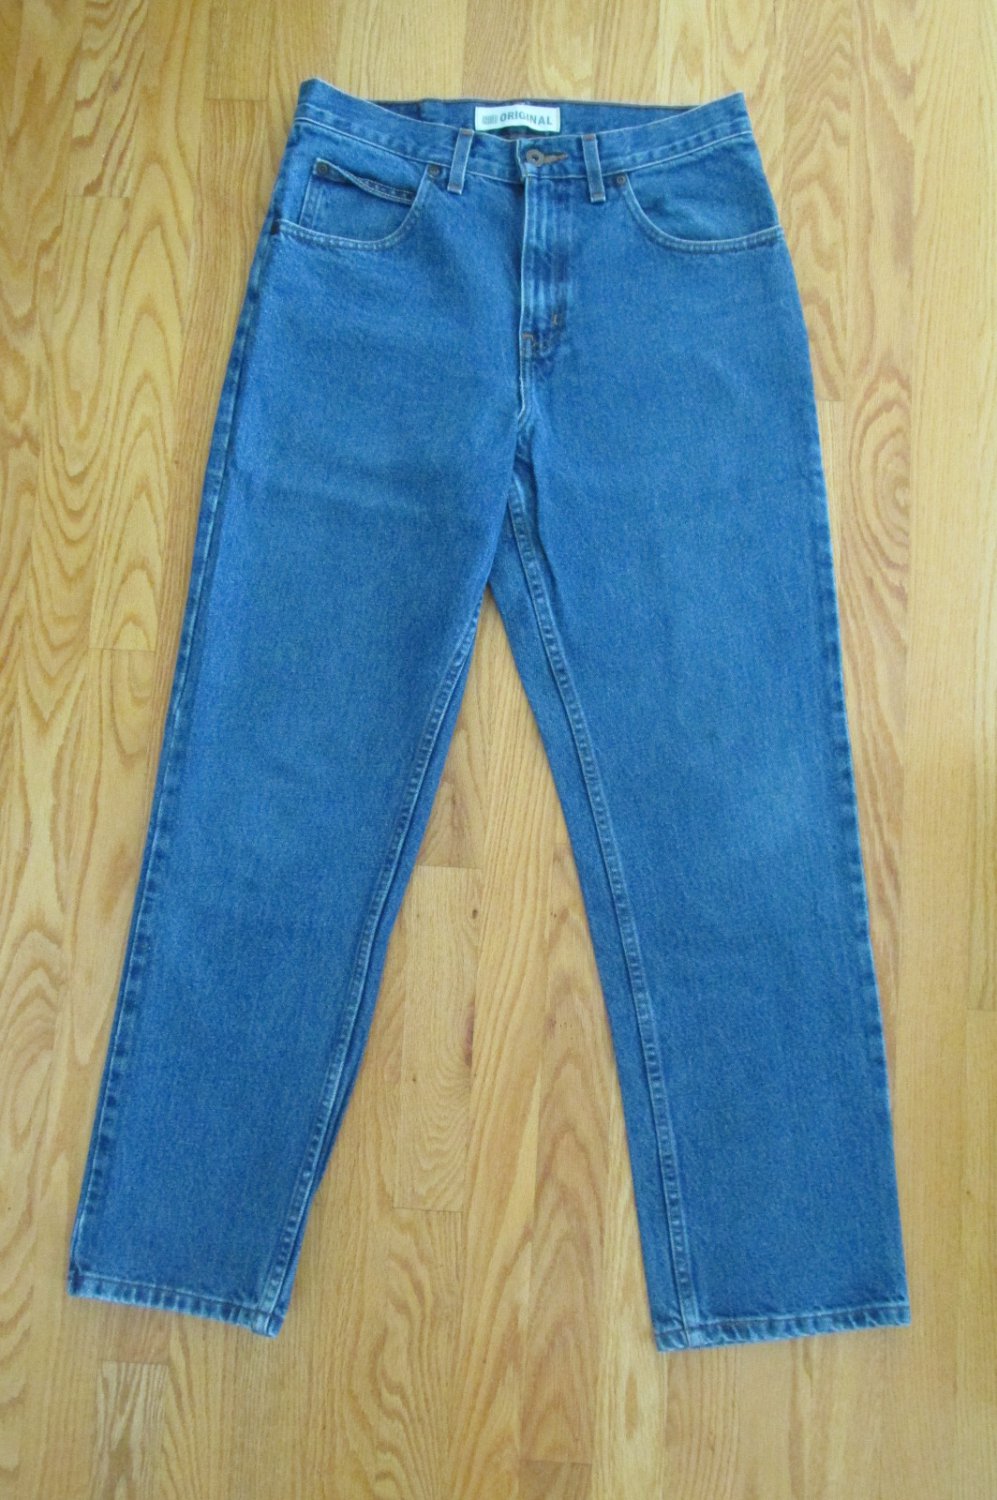 FADED GLORY MEN'S SIZE 30 X 30 JEANS MED BLUE STONE WASHED STRAIGHT LEG ...